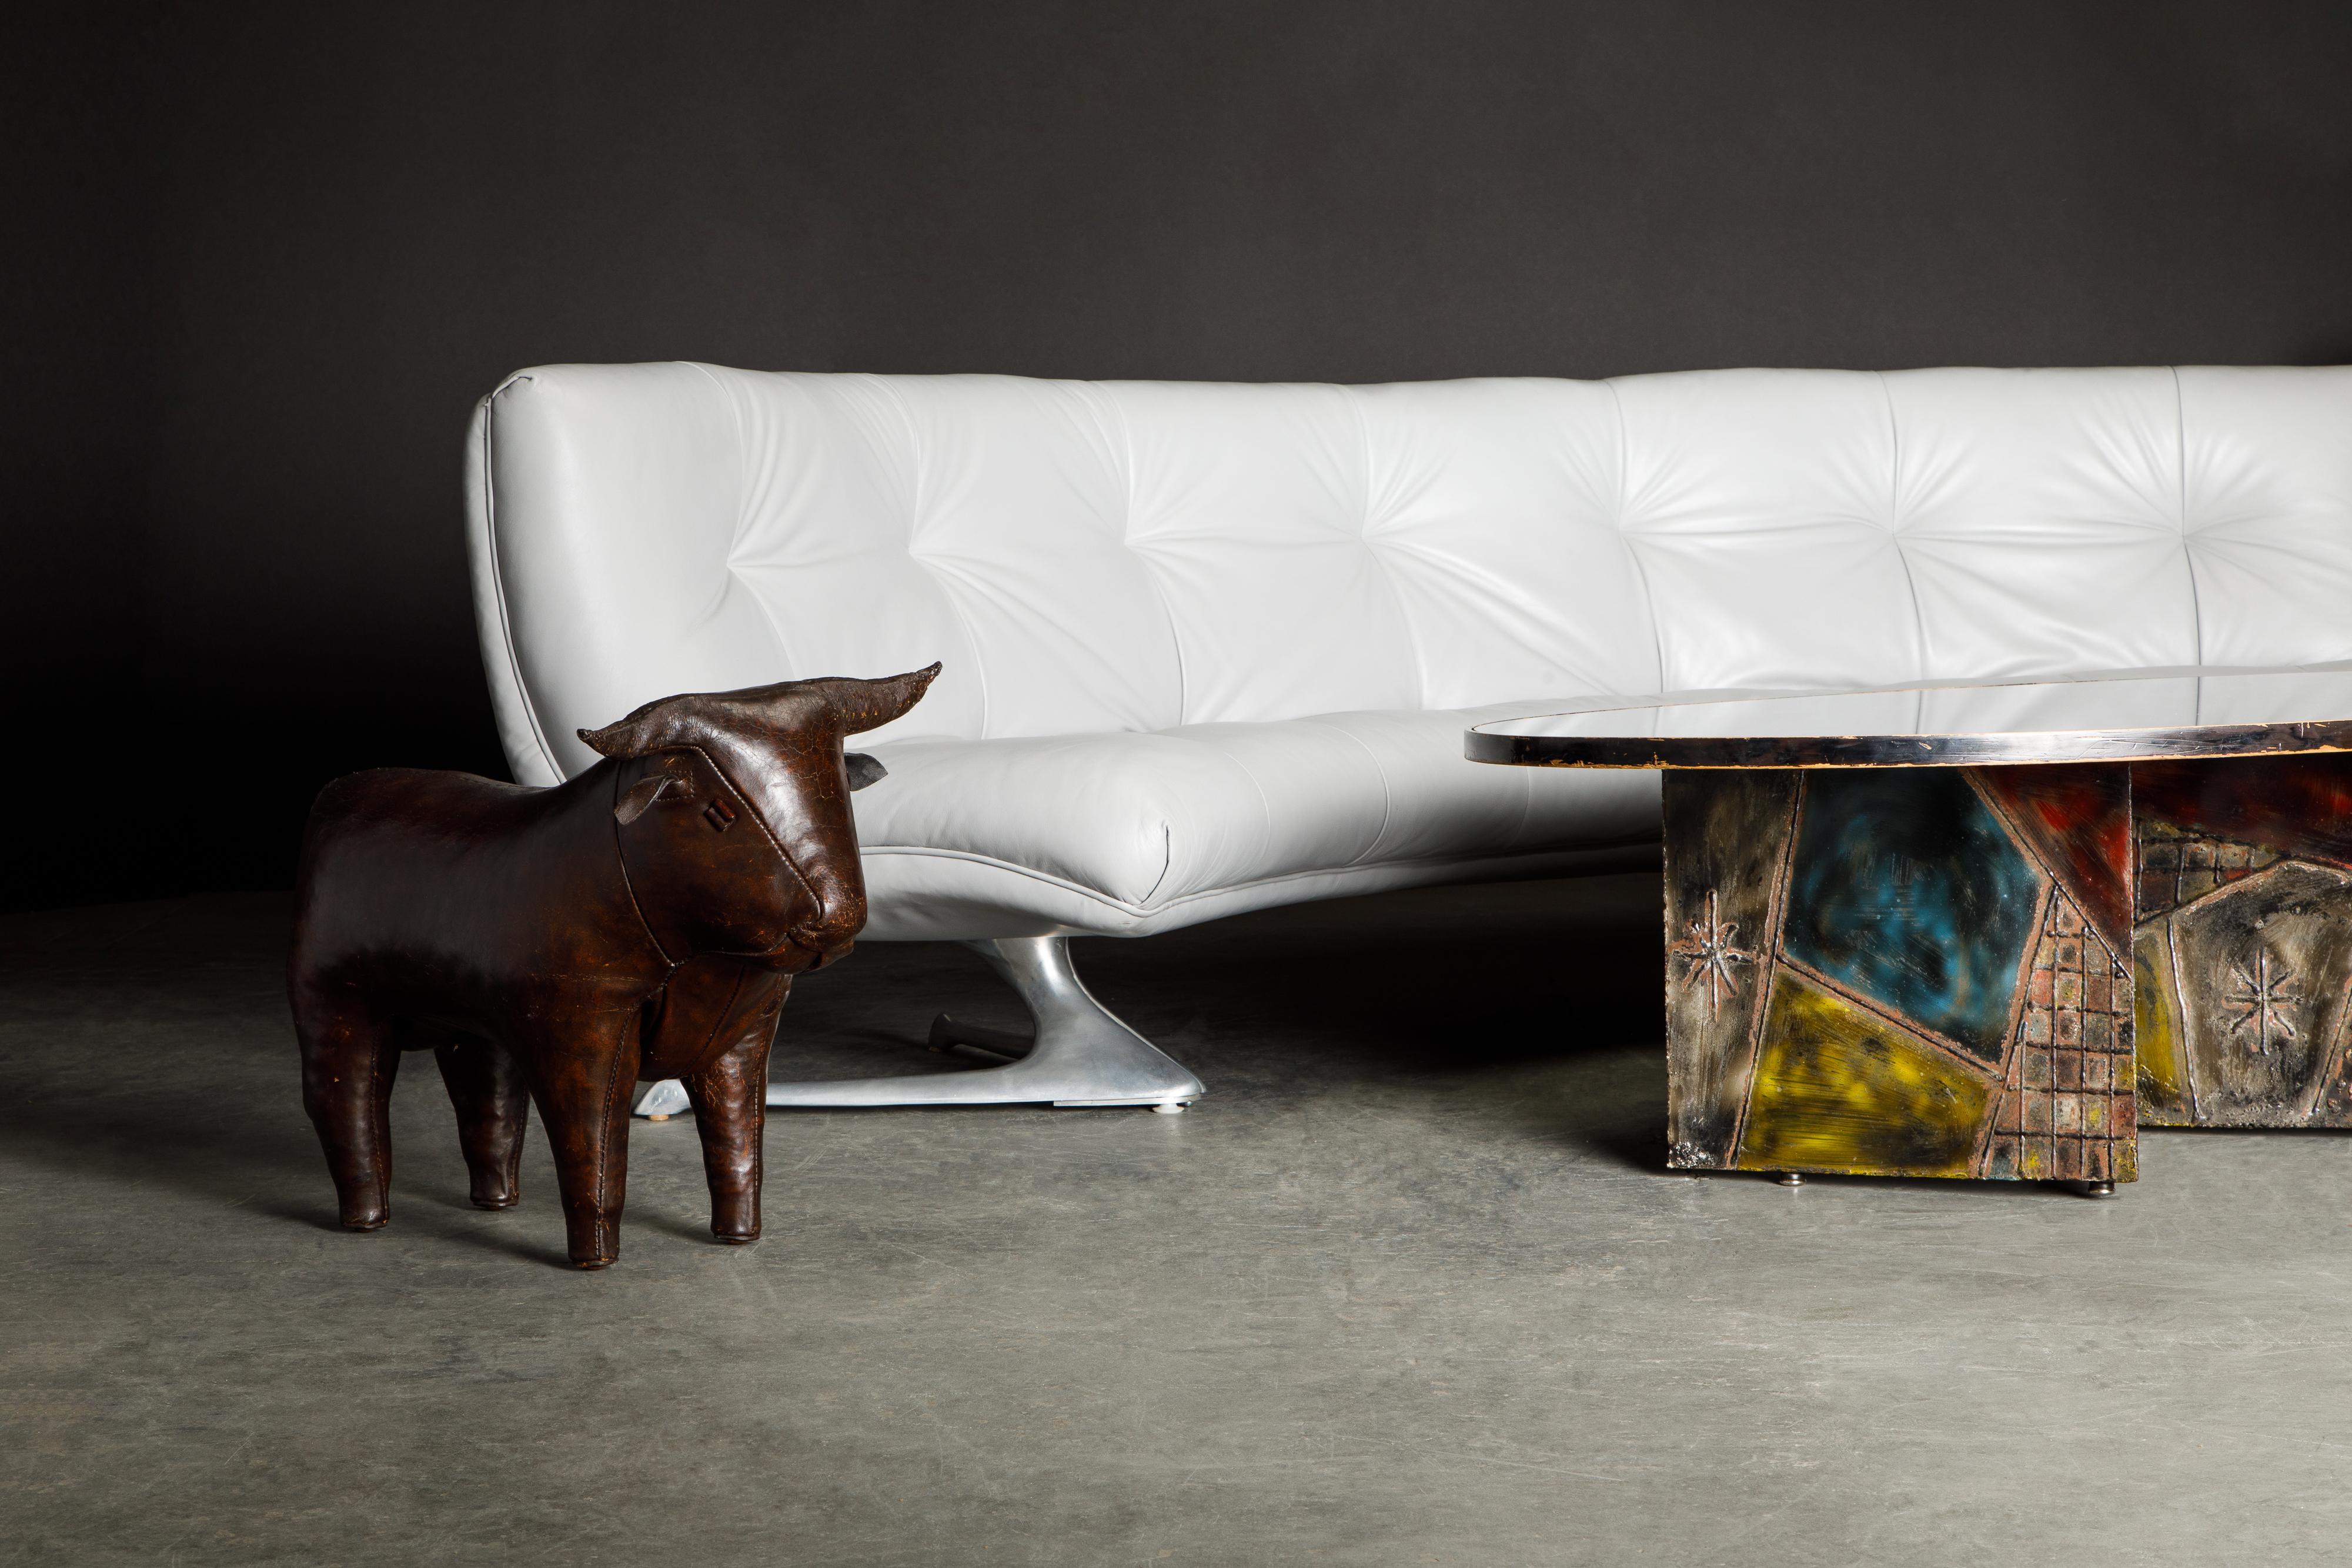 Rare 'Unicorn' Leather and Aluminum Curved Sofa by Vladimir Kagan, c. 1963 For Sale 8